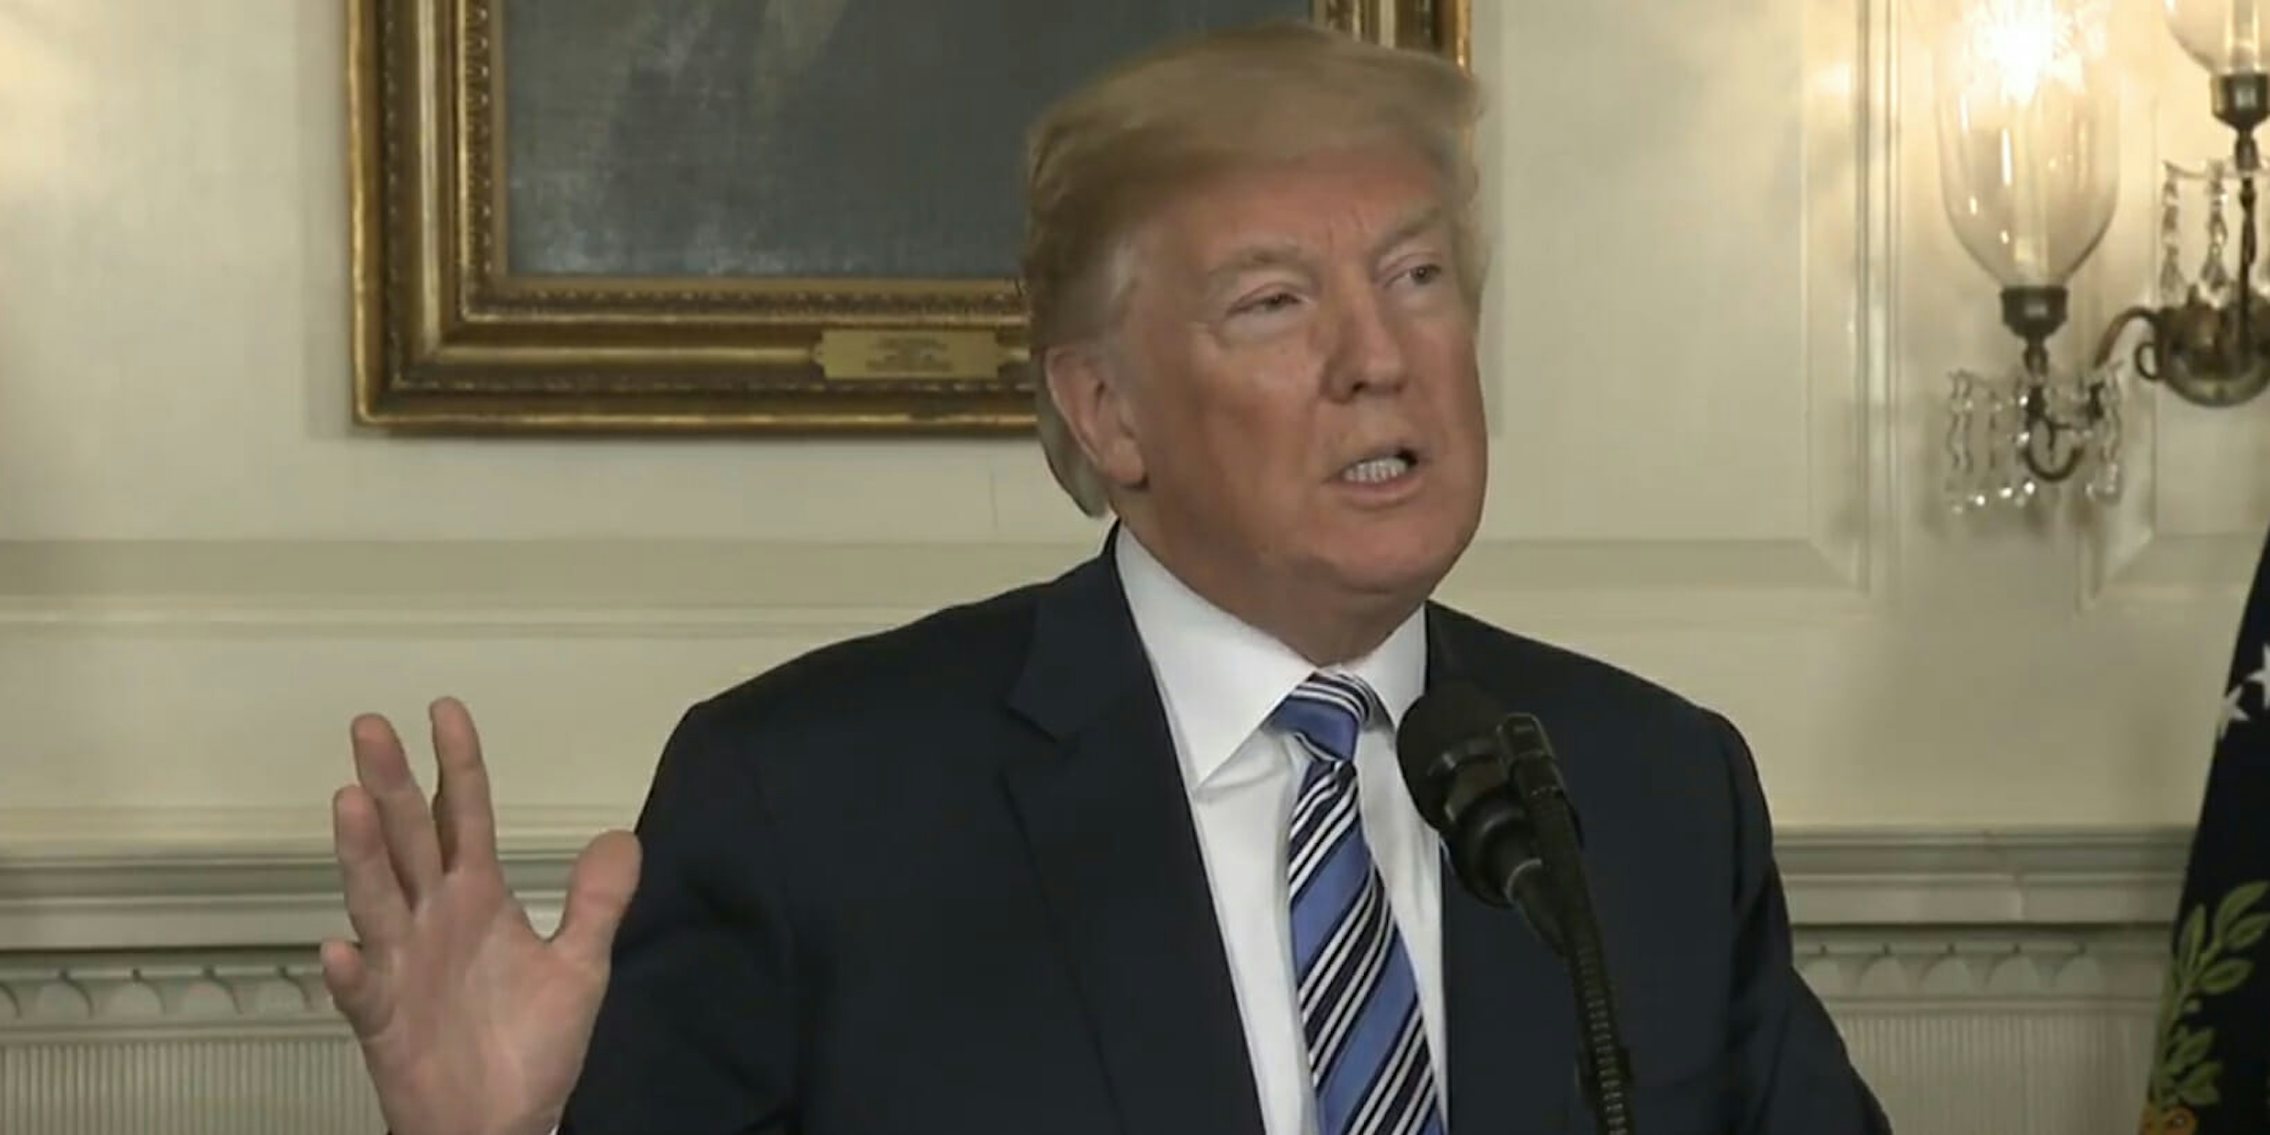 President Donald Trump, when discussing his gripes with a massive spending bill he signed into law on Friday, continued to try and cast blame on Democrats for the lack of legislative fix for the Deferred Action for Childhood Arrivals (DACA) program.